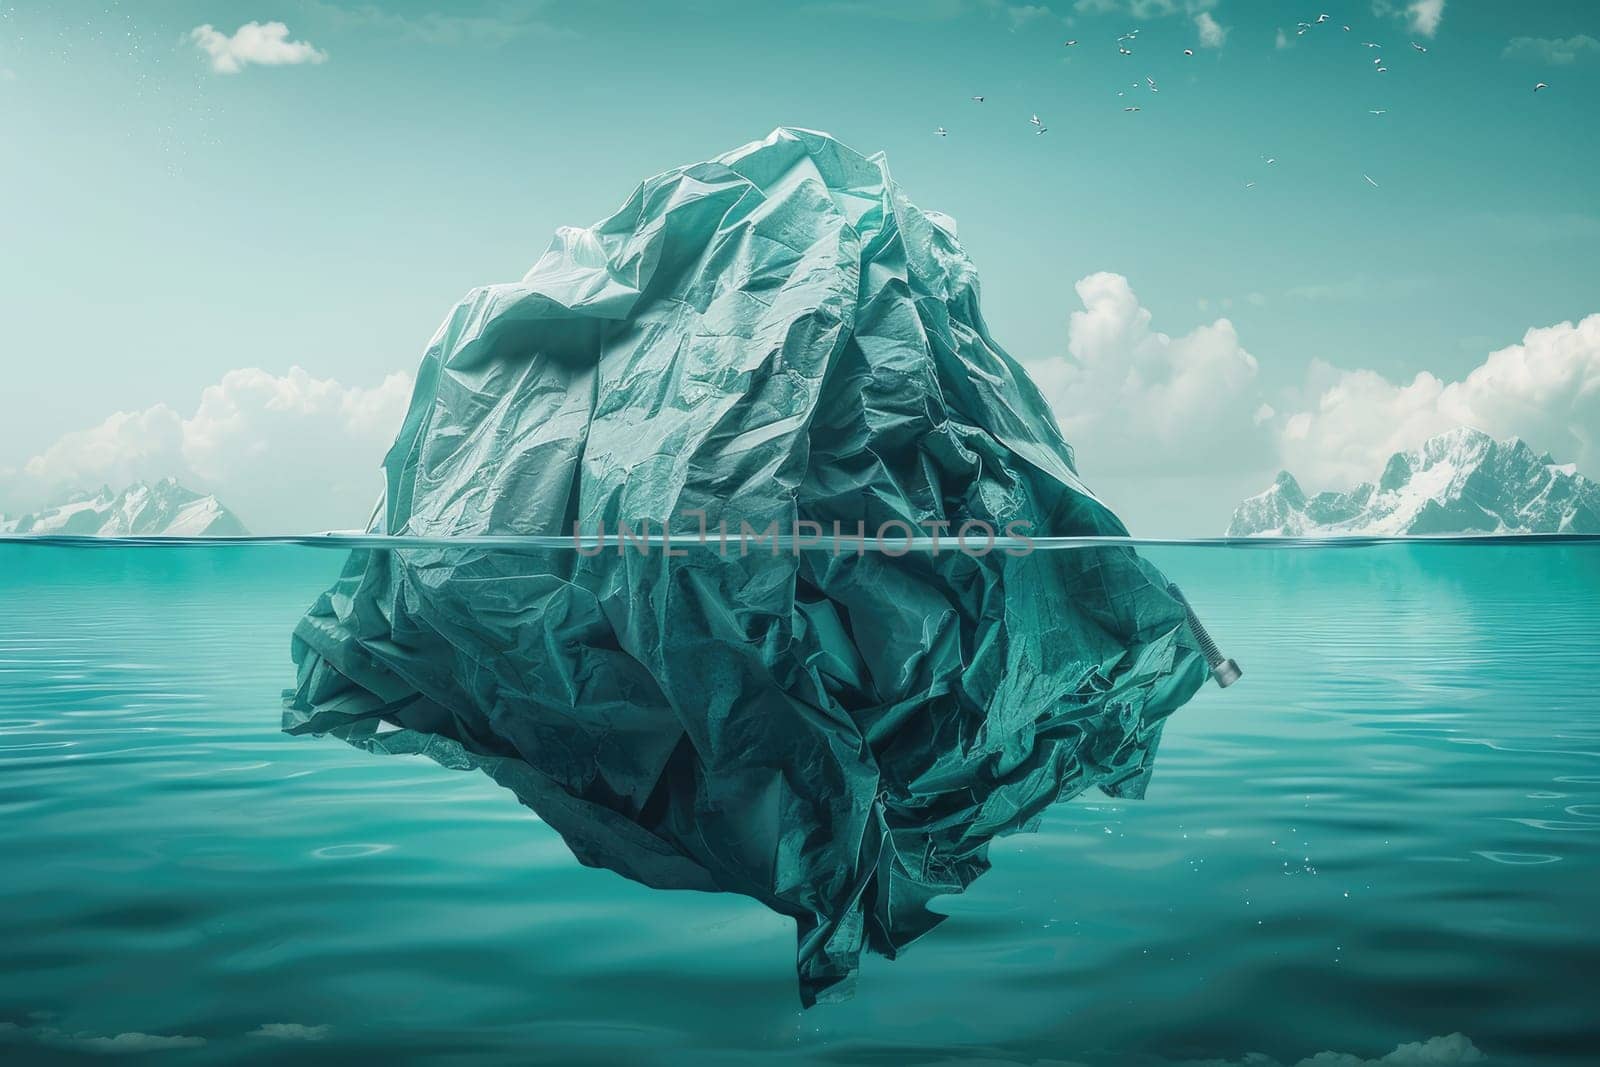 Plastic pollution in the ocean, Stop ocean plastic pollution, Save our ocean, Banner background.